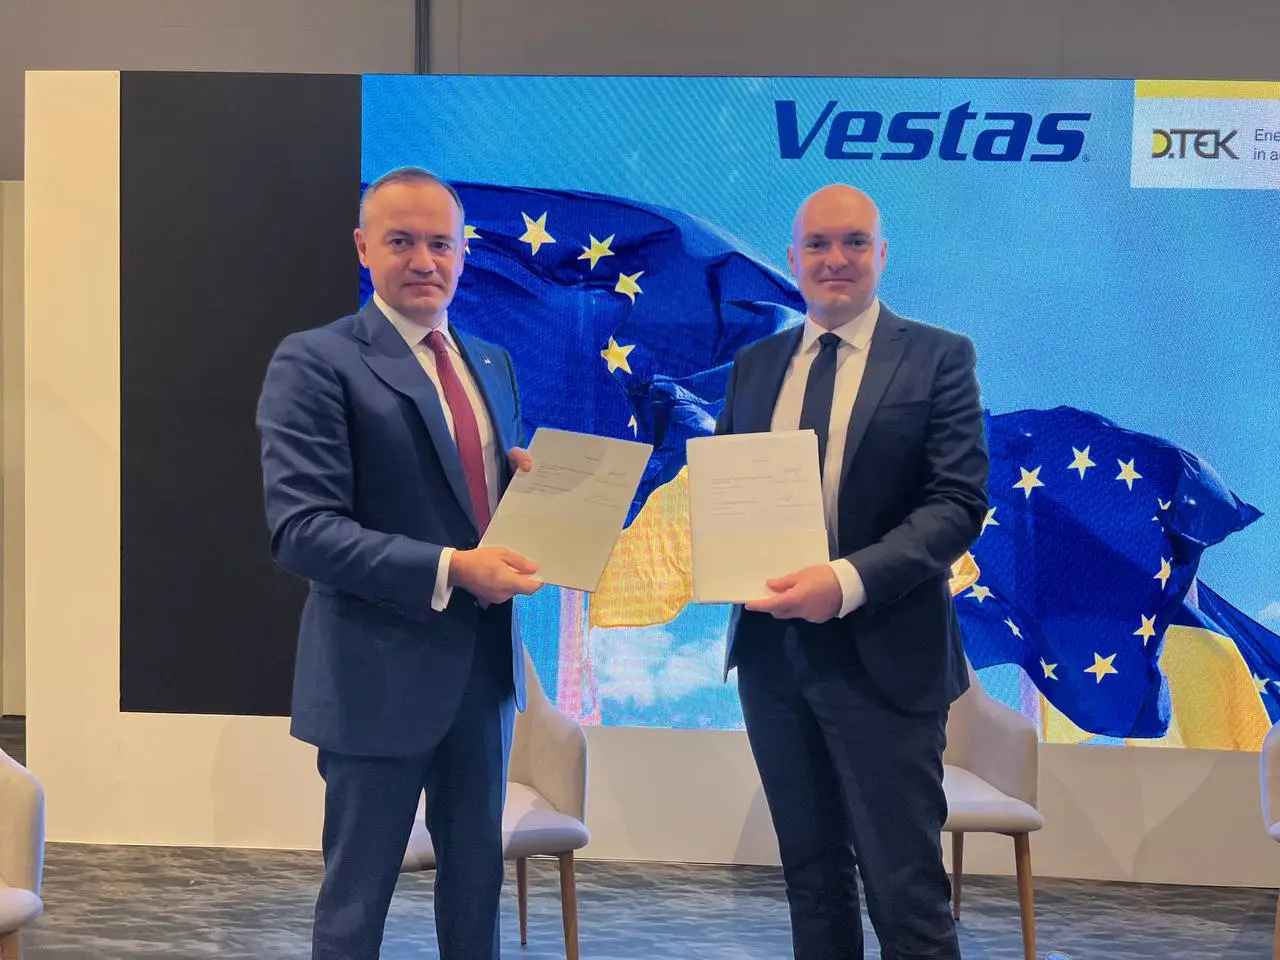 DTEK and Vestas ready to implement Ukraine’s largest private investment project in the energy sector since gaining independence